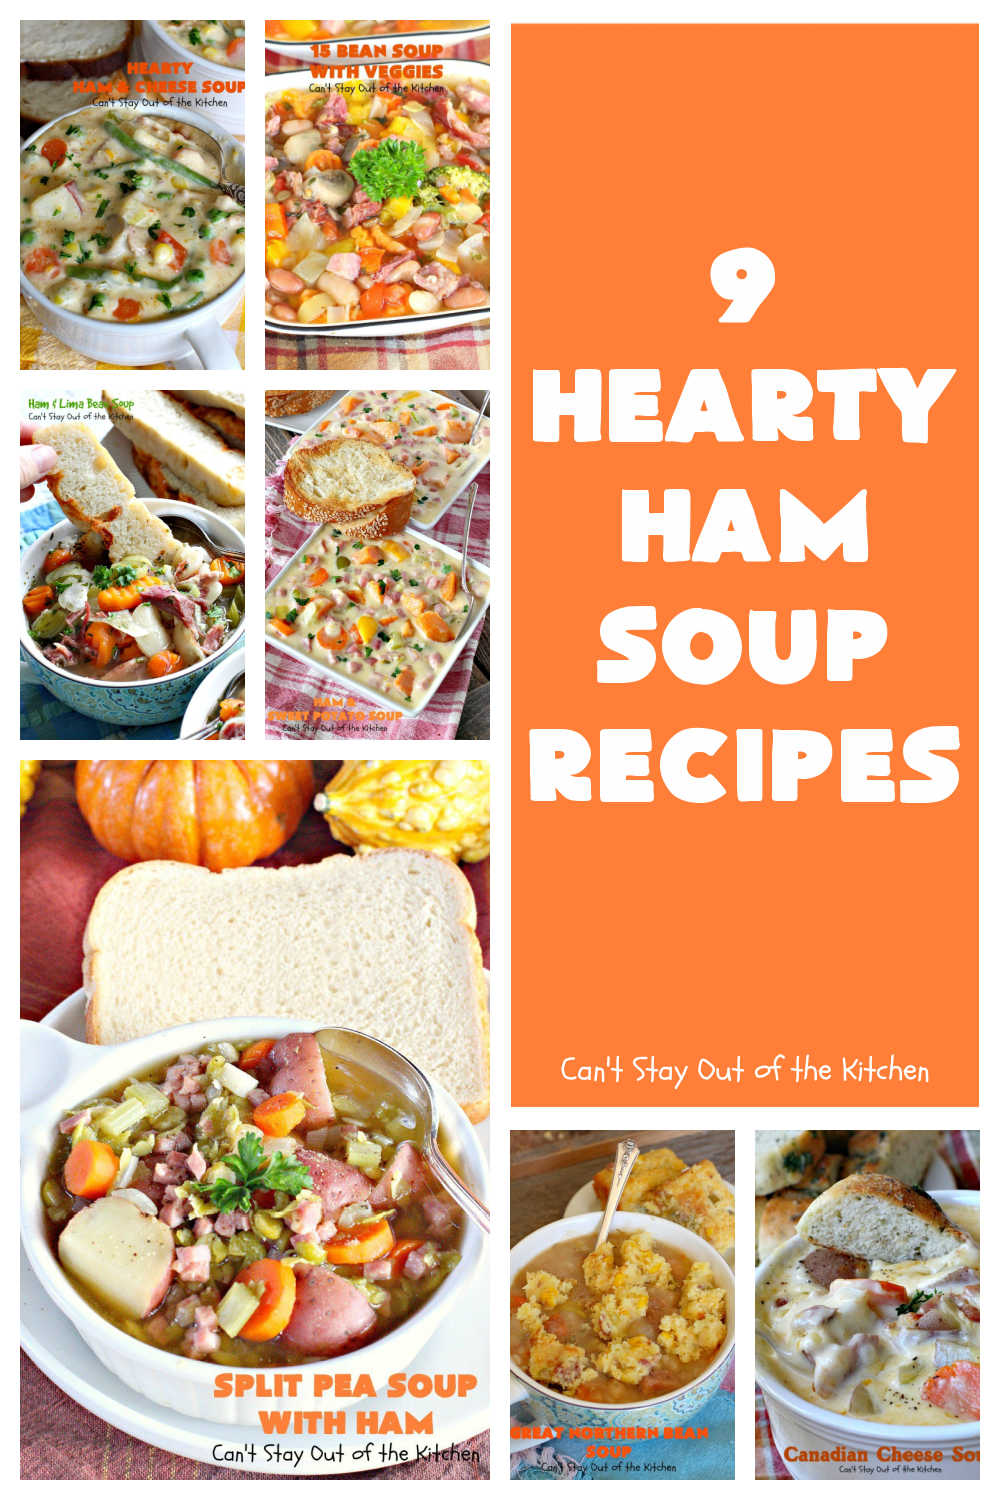 9 Hearty Ham Soup Recipes | Can't Stay Out of the Kitchen | 9 delicious ways to use up leftover #ham from #Easter or other special occasions. These #soup #recipes are hearty, filling & satisfying. Perfect comfort food for winter months. #chowder #HamSoup #HamSoupRecipes #9HeartyHamSoupRecipes